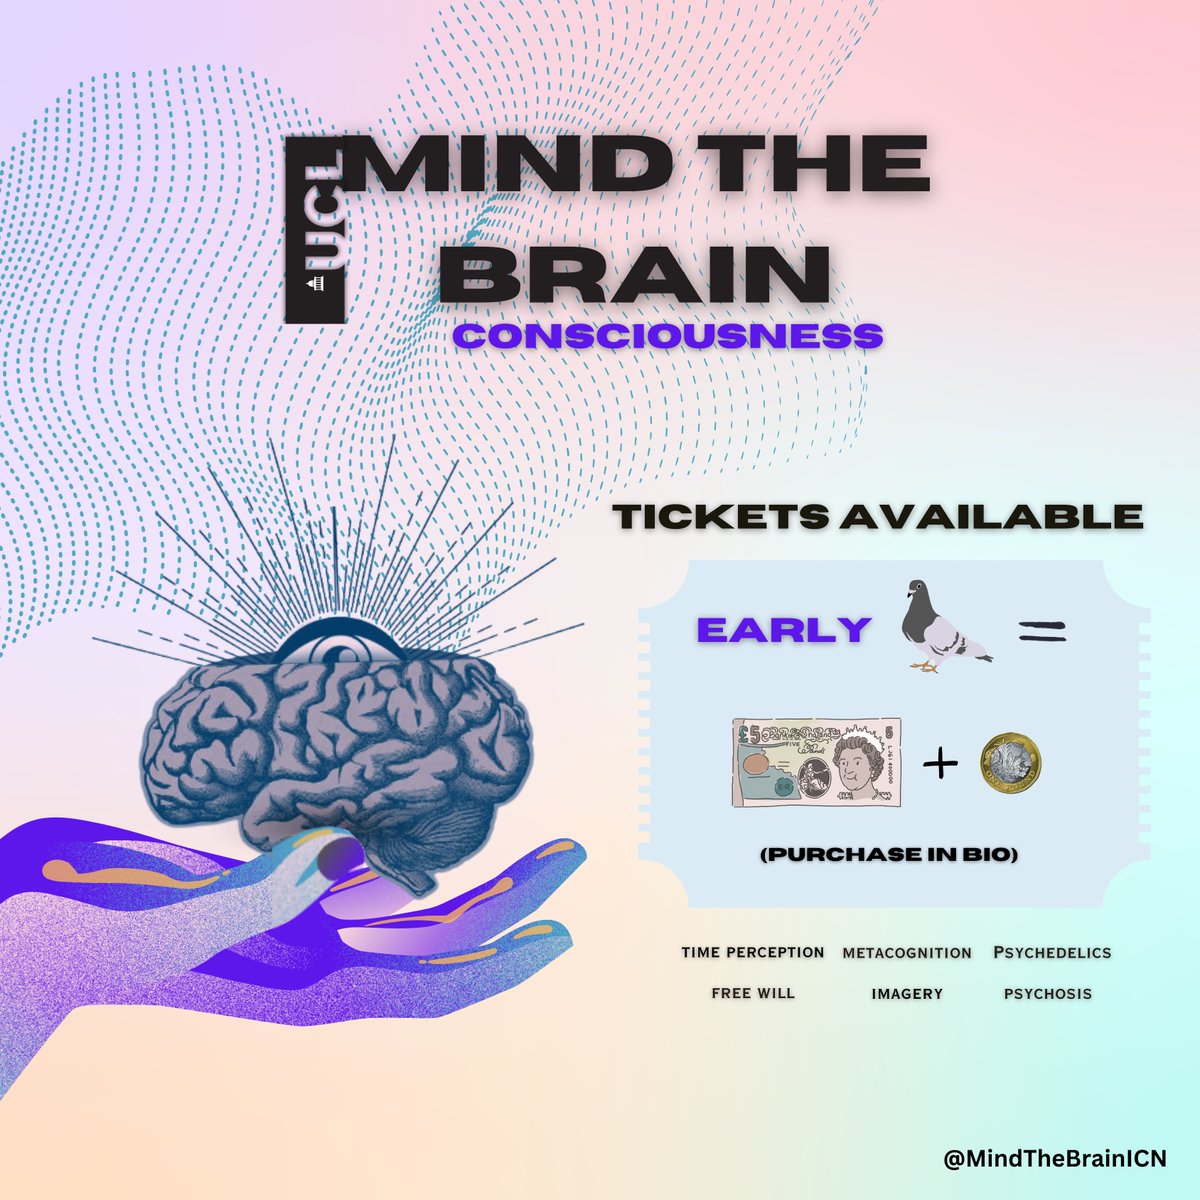 Exciting news! Early bird tickets are now available to purchase via the link in our bio (£6) 🎟️🎟️🎟️. Secure yours before the price increases❗️ Look forward to seeing you all there on June 15th🧠. #MindTheBrain #UCL #Consciousness #Brain #londonactivities #neuroscience #psychology